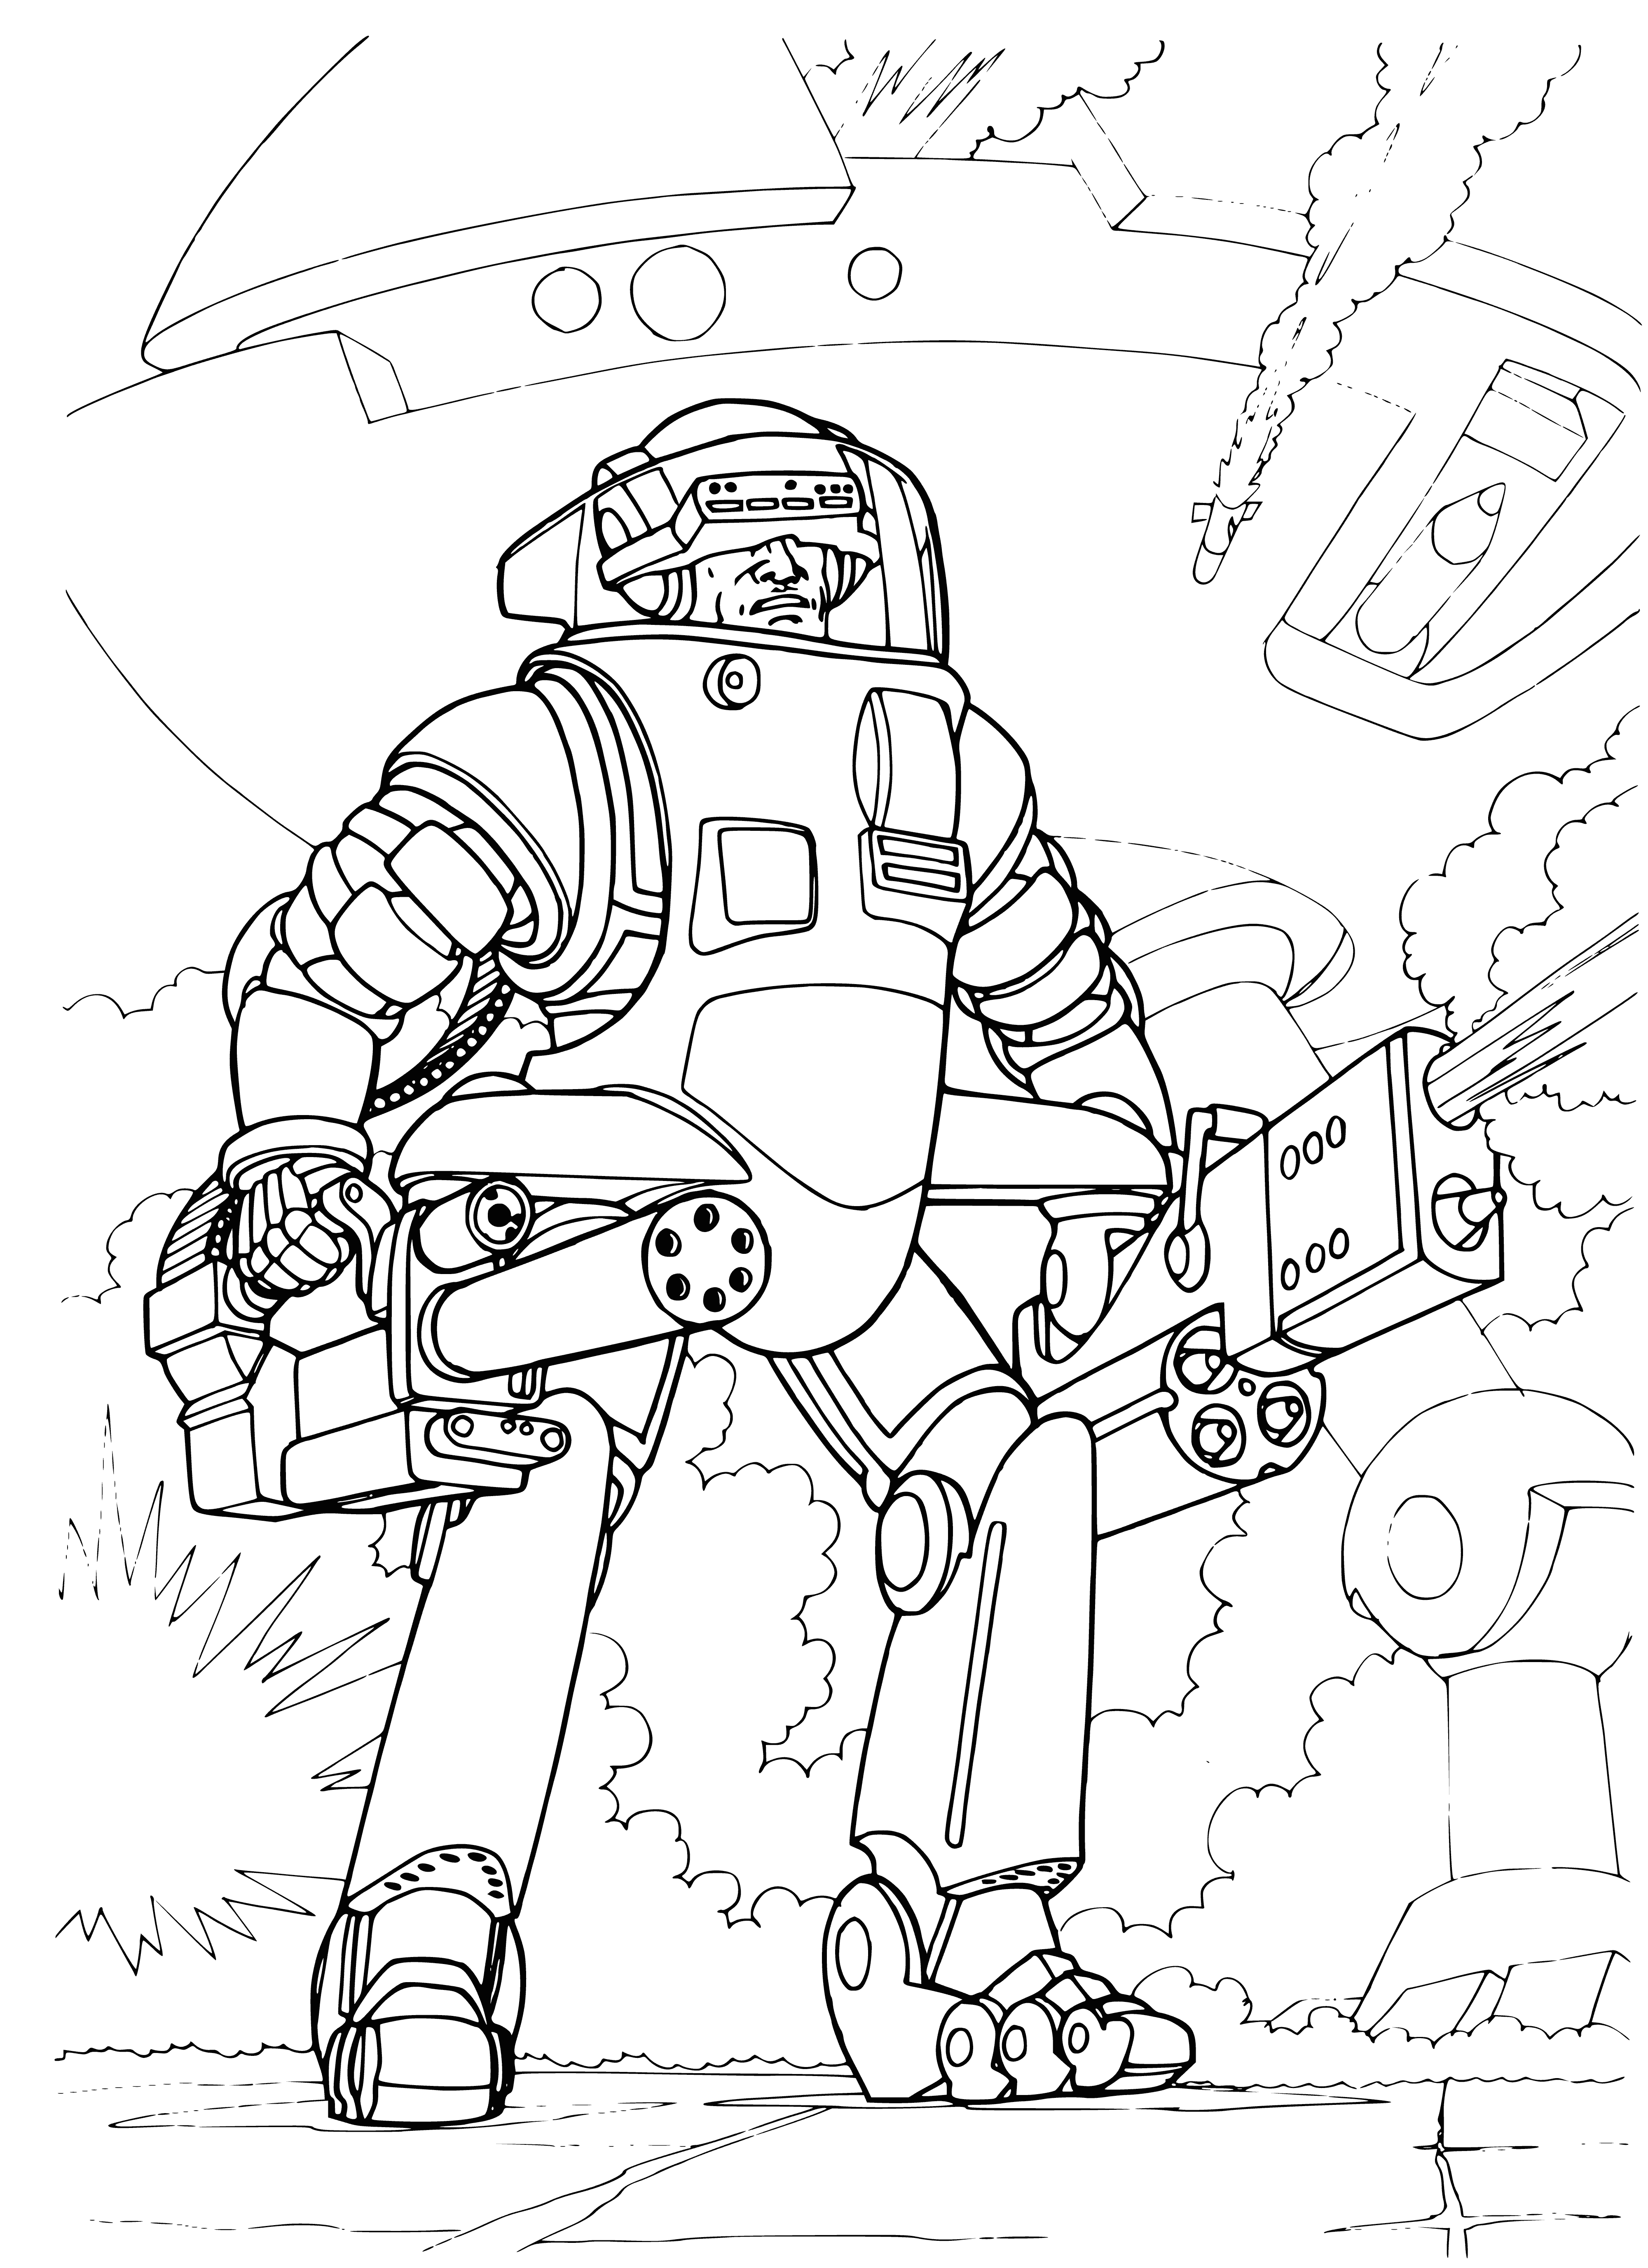 Heavy infantryman coloring page